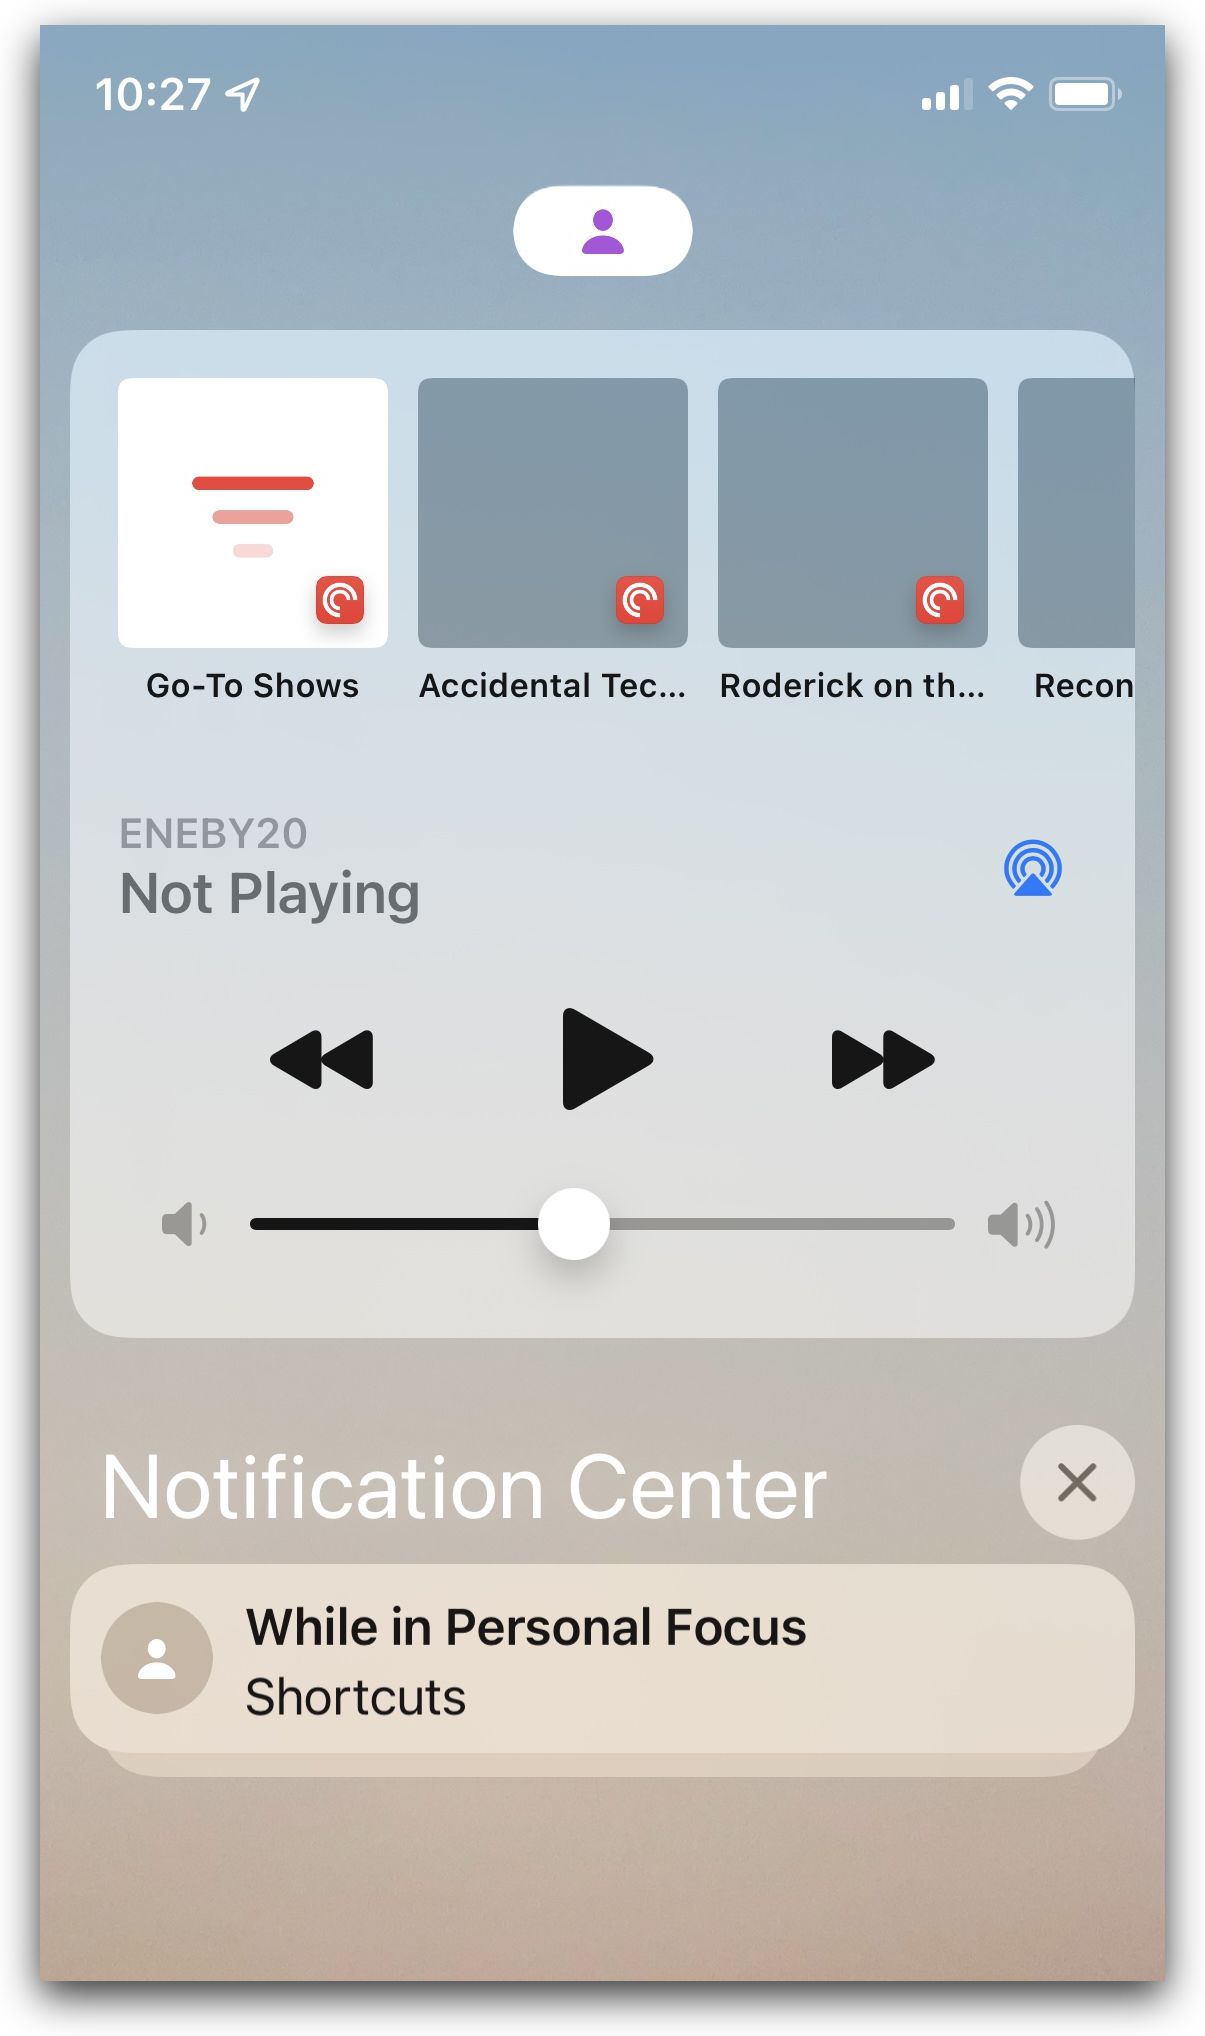 Shortcuts notification delivered during focus mode